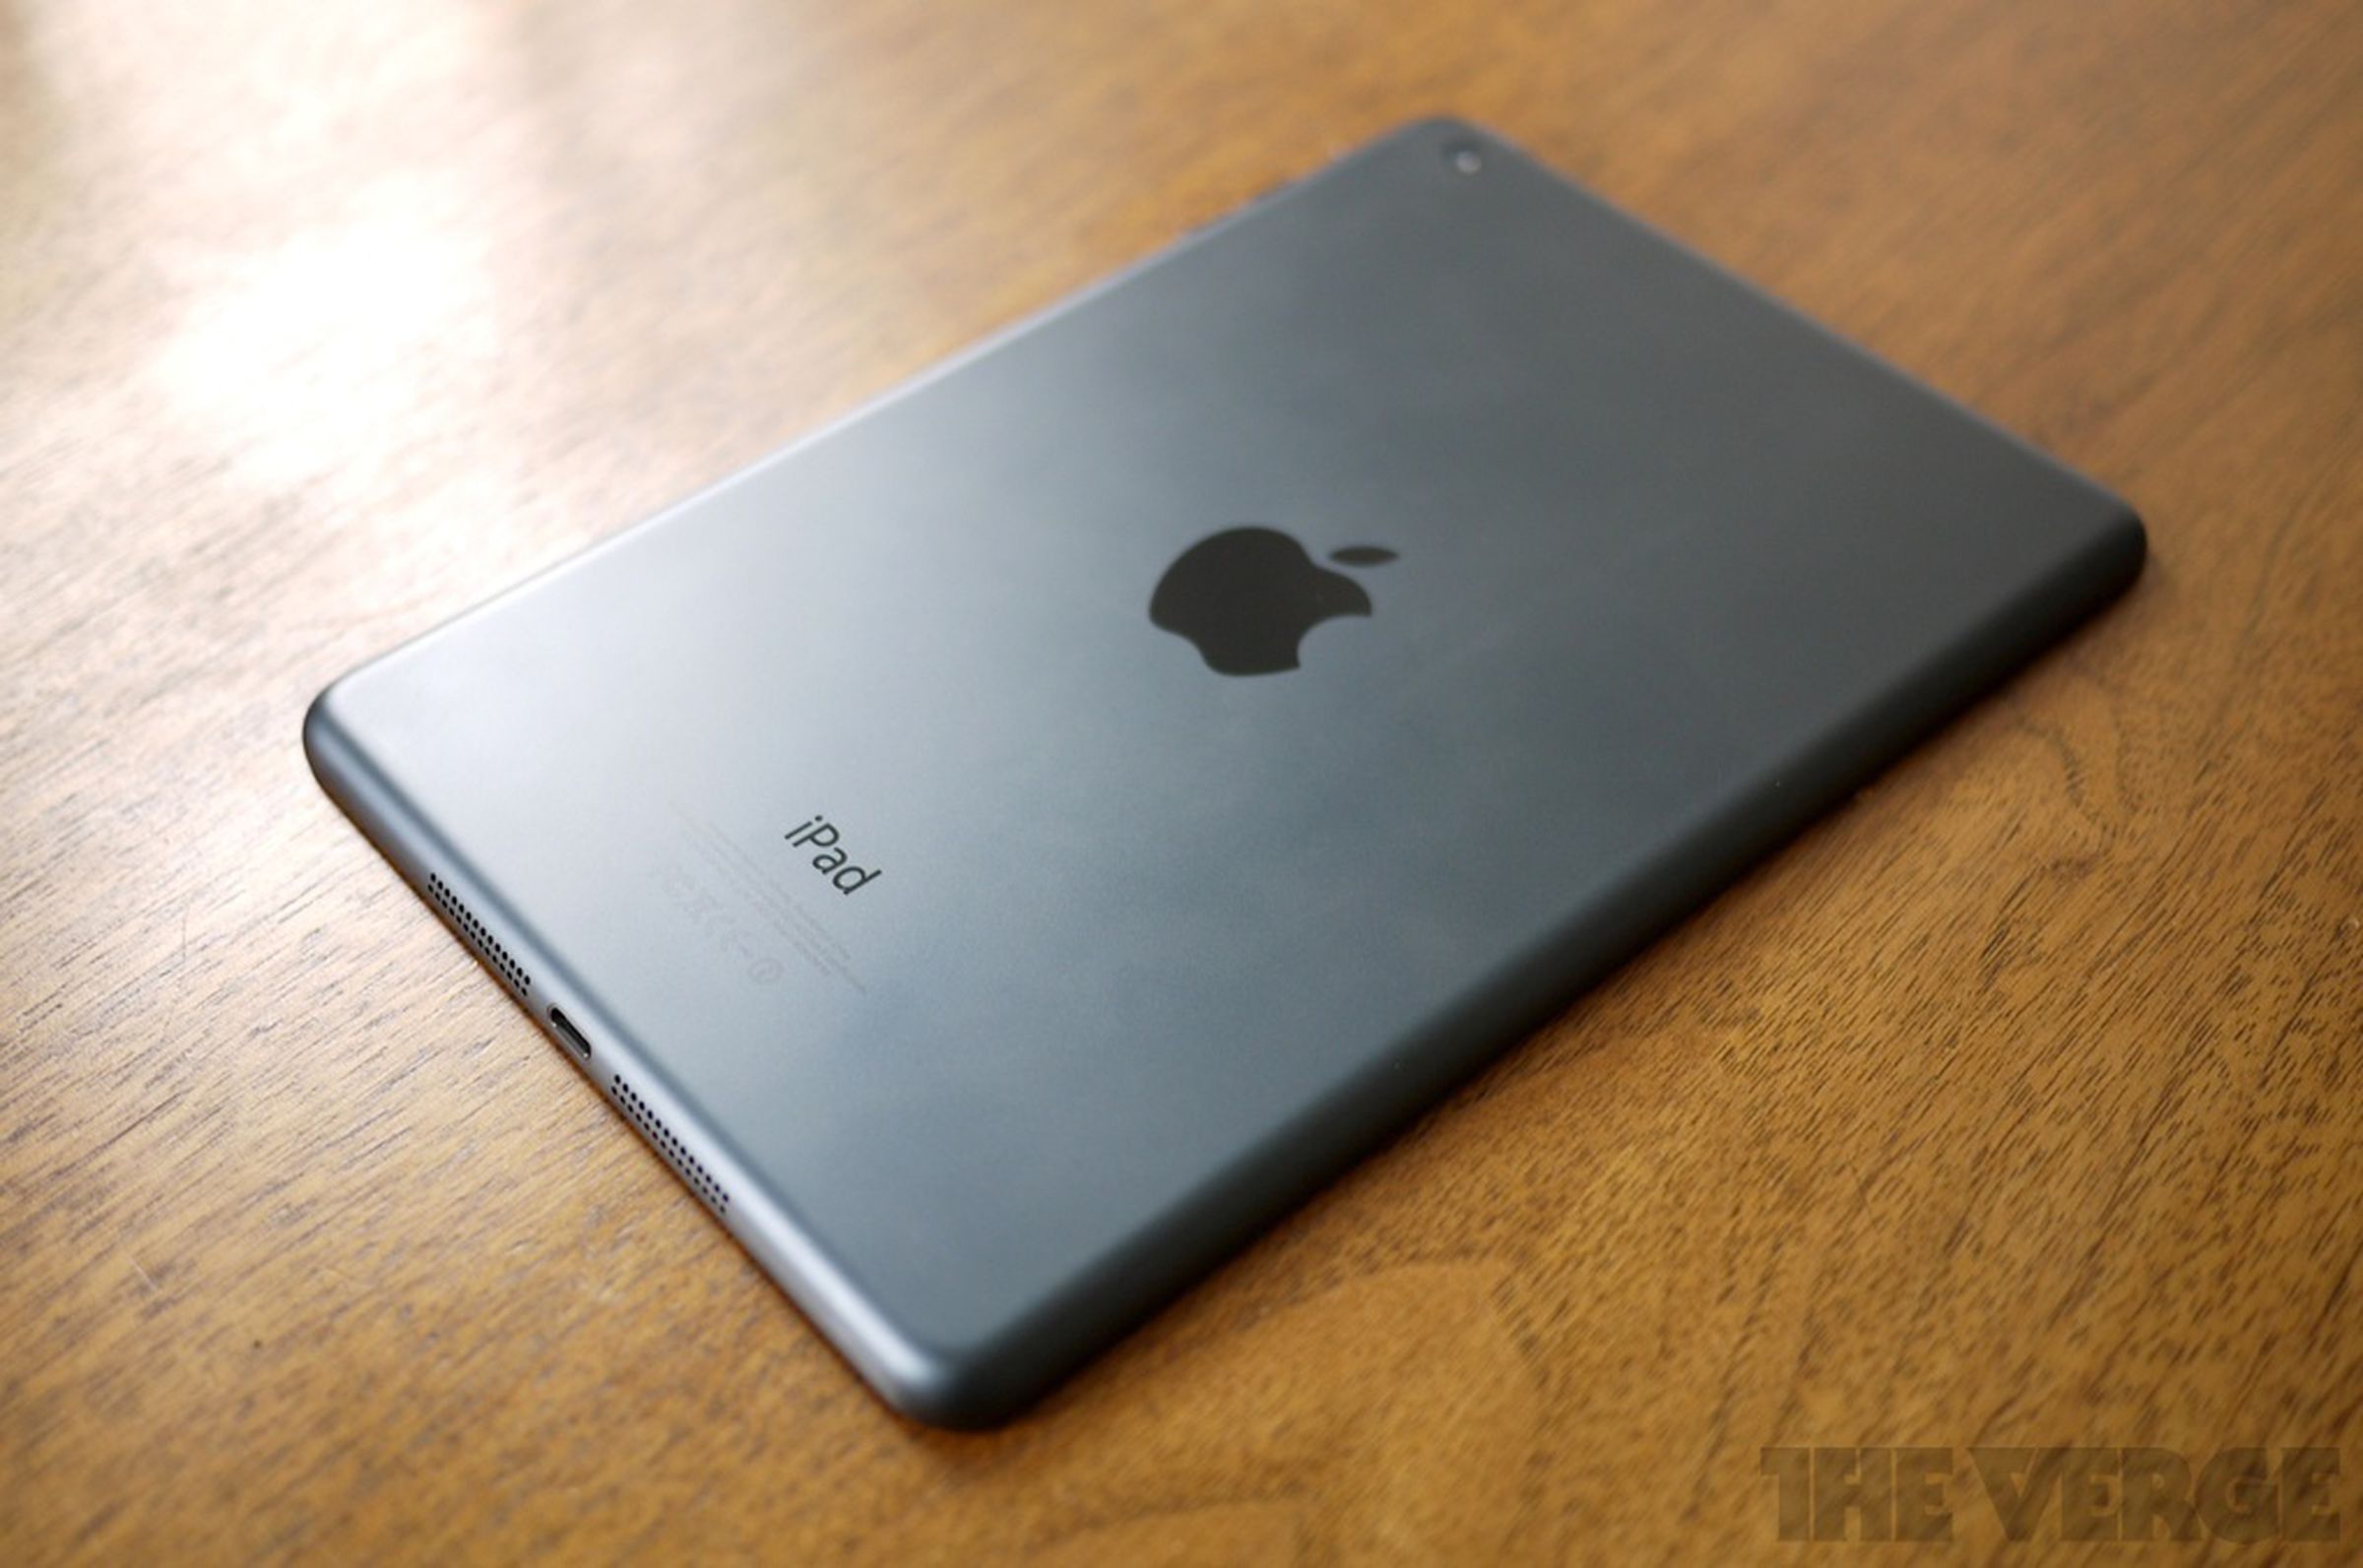 Hands-on with the iPad mini